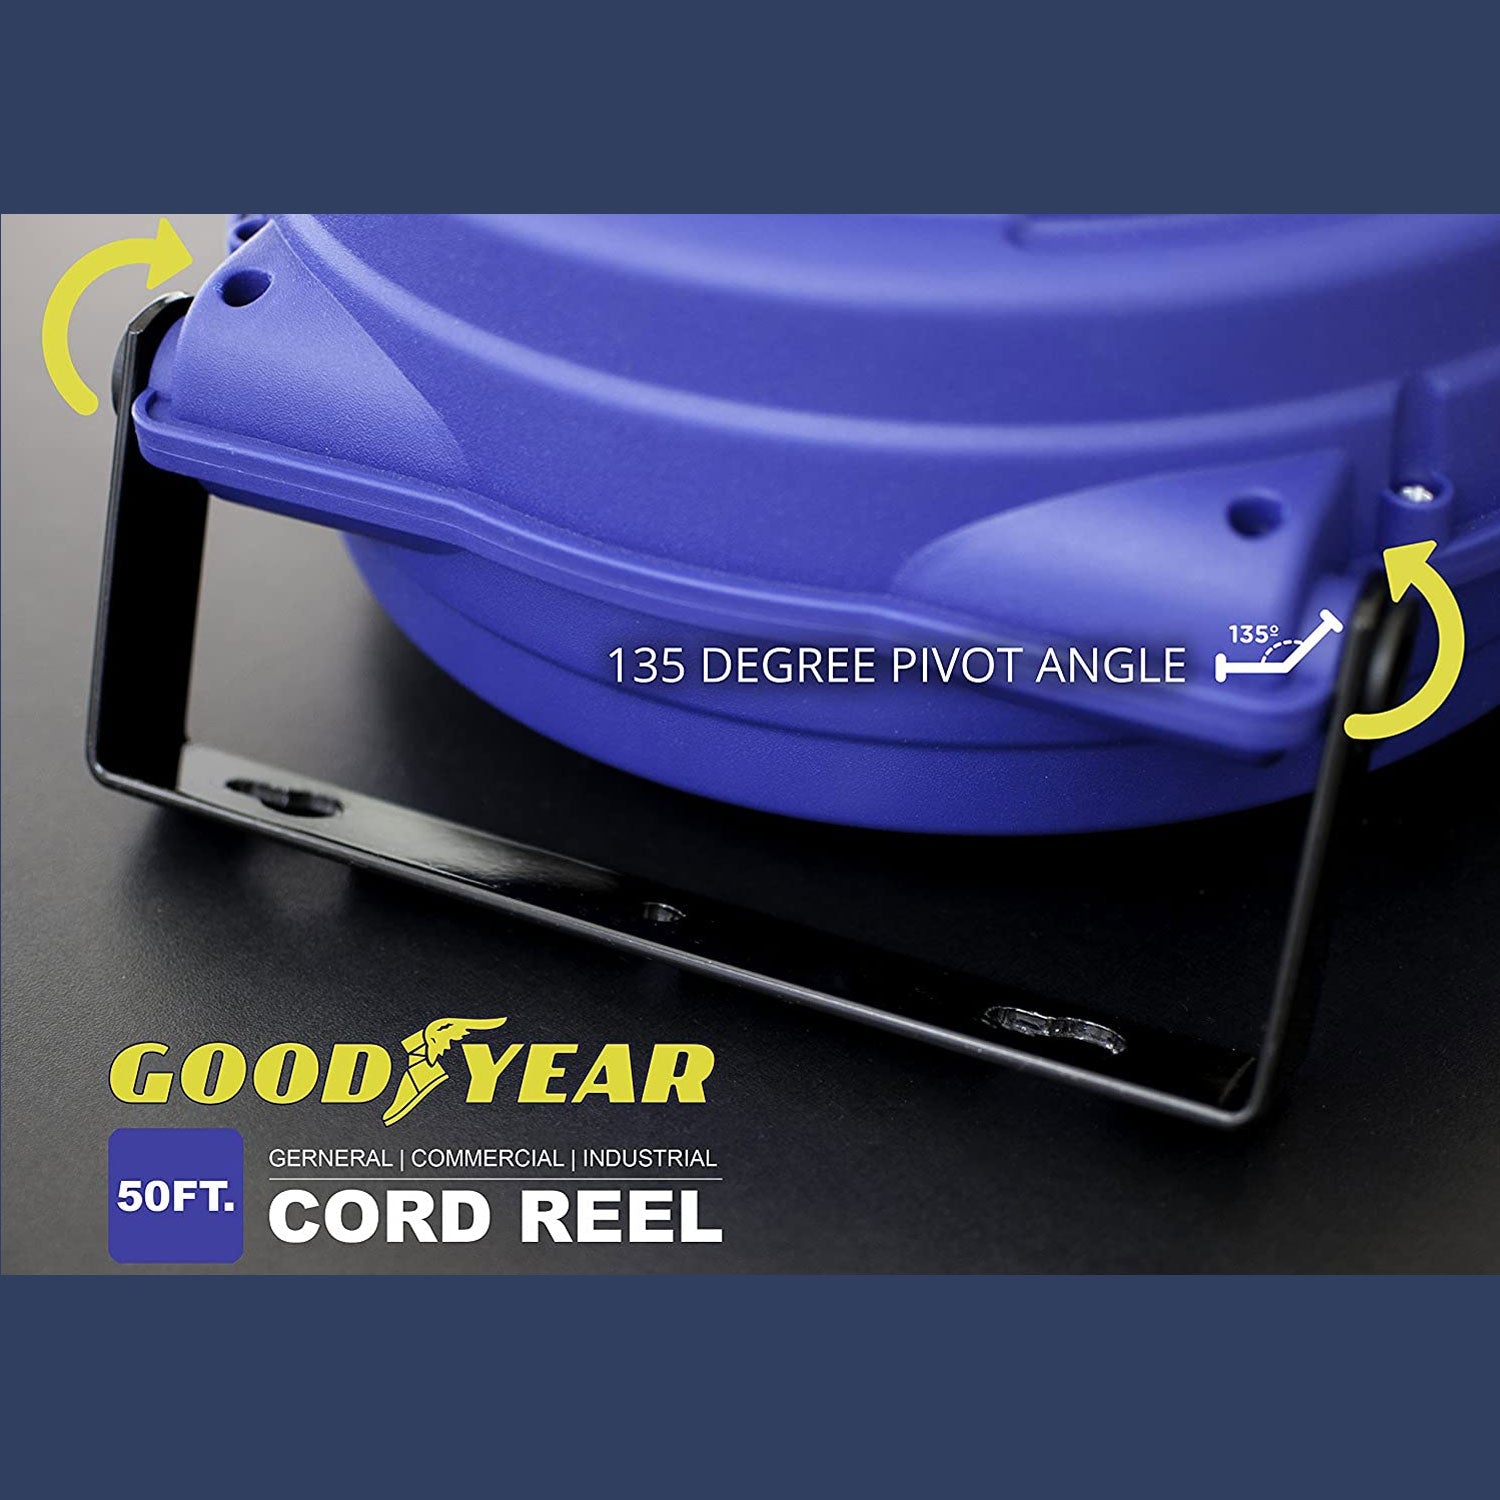 Goodyear Mountable Retractable Extension Cord Reel - 16AWG x 50' Ft, 3